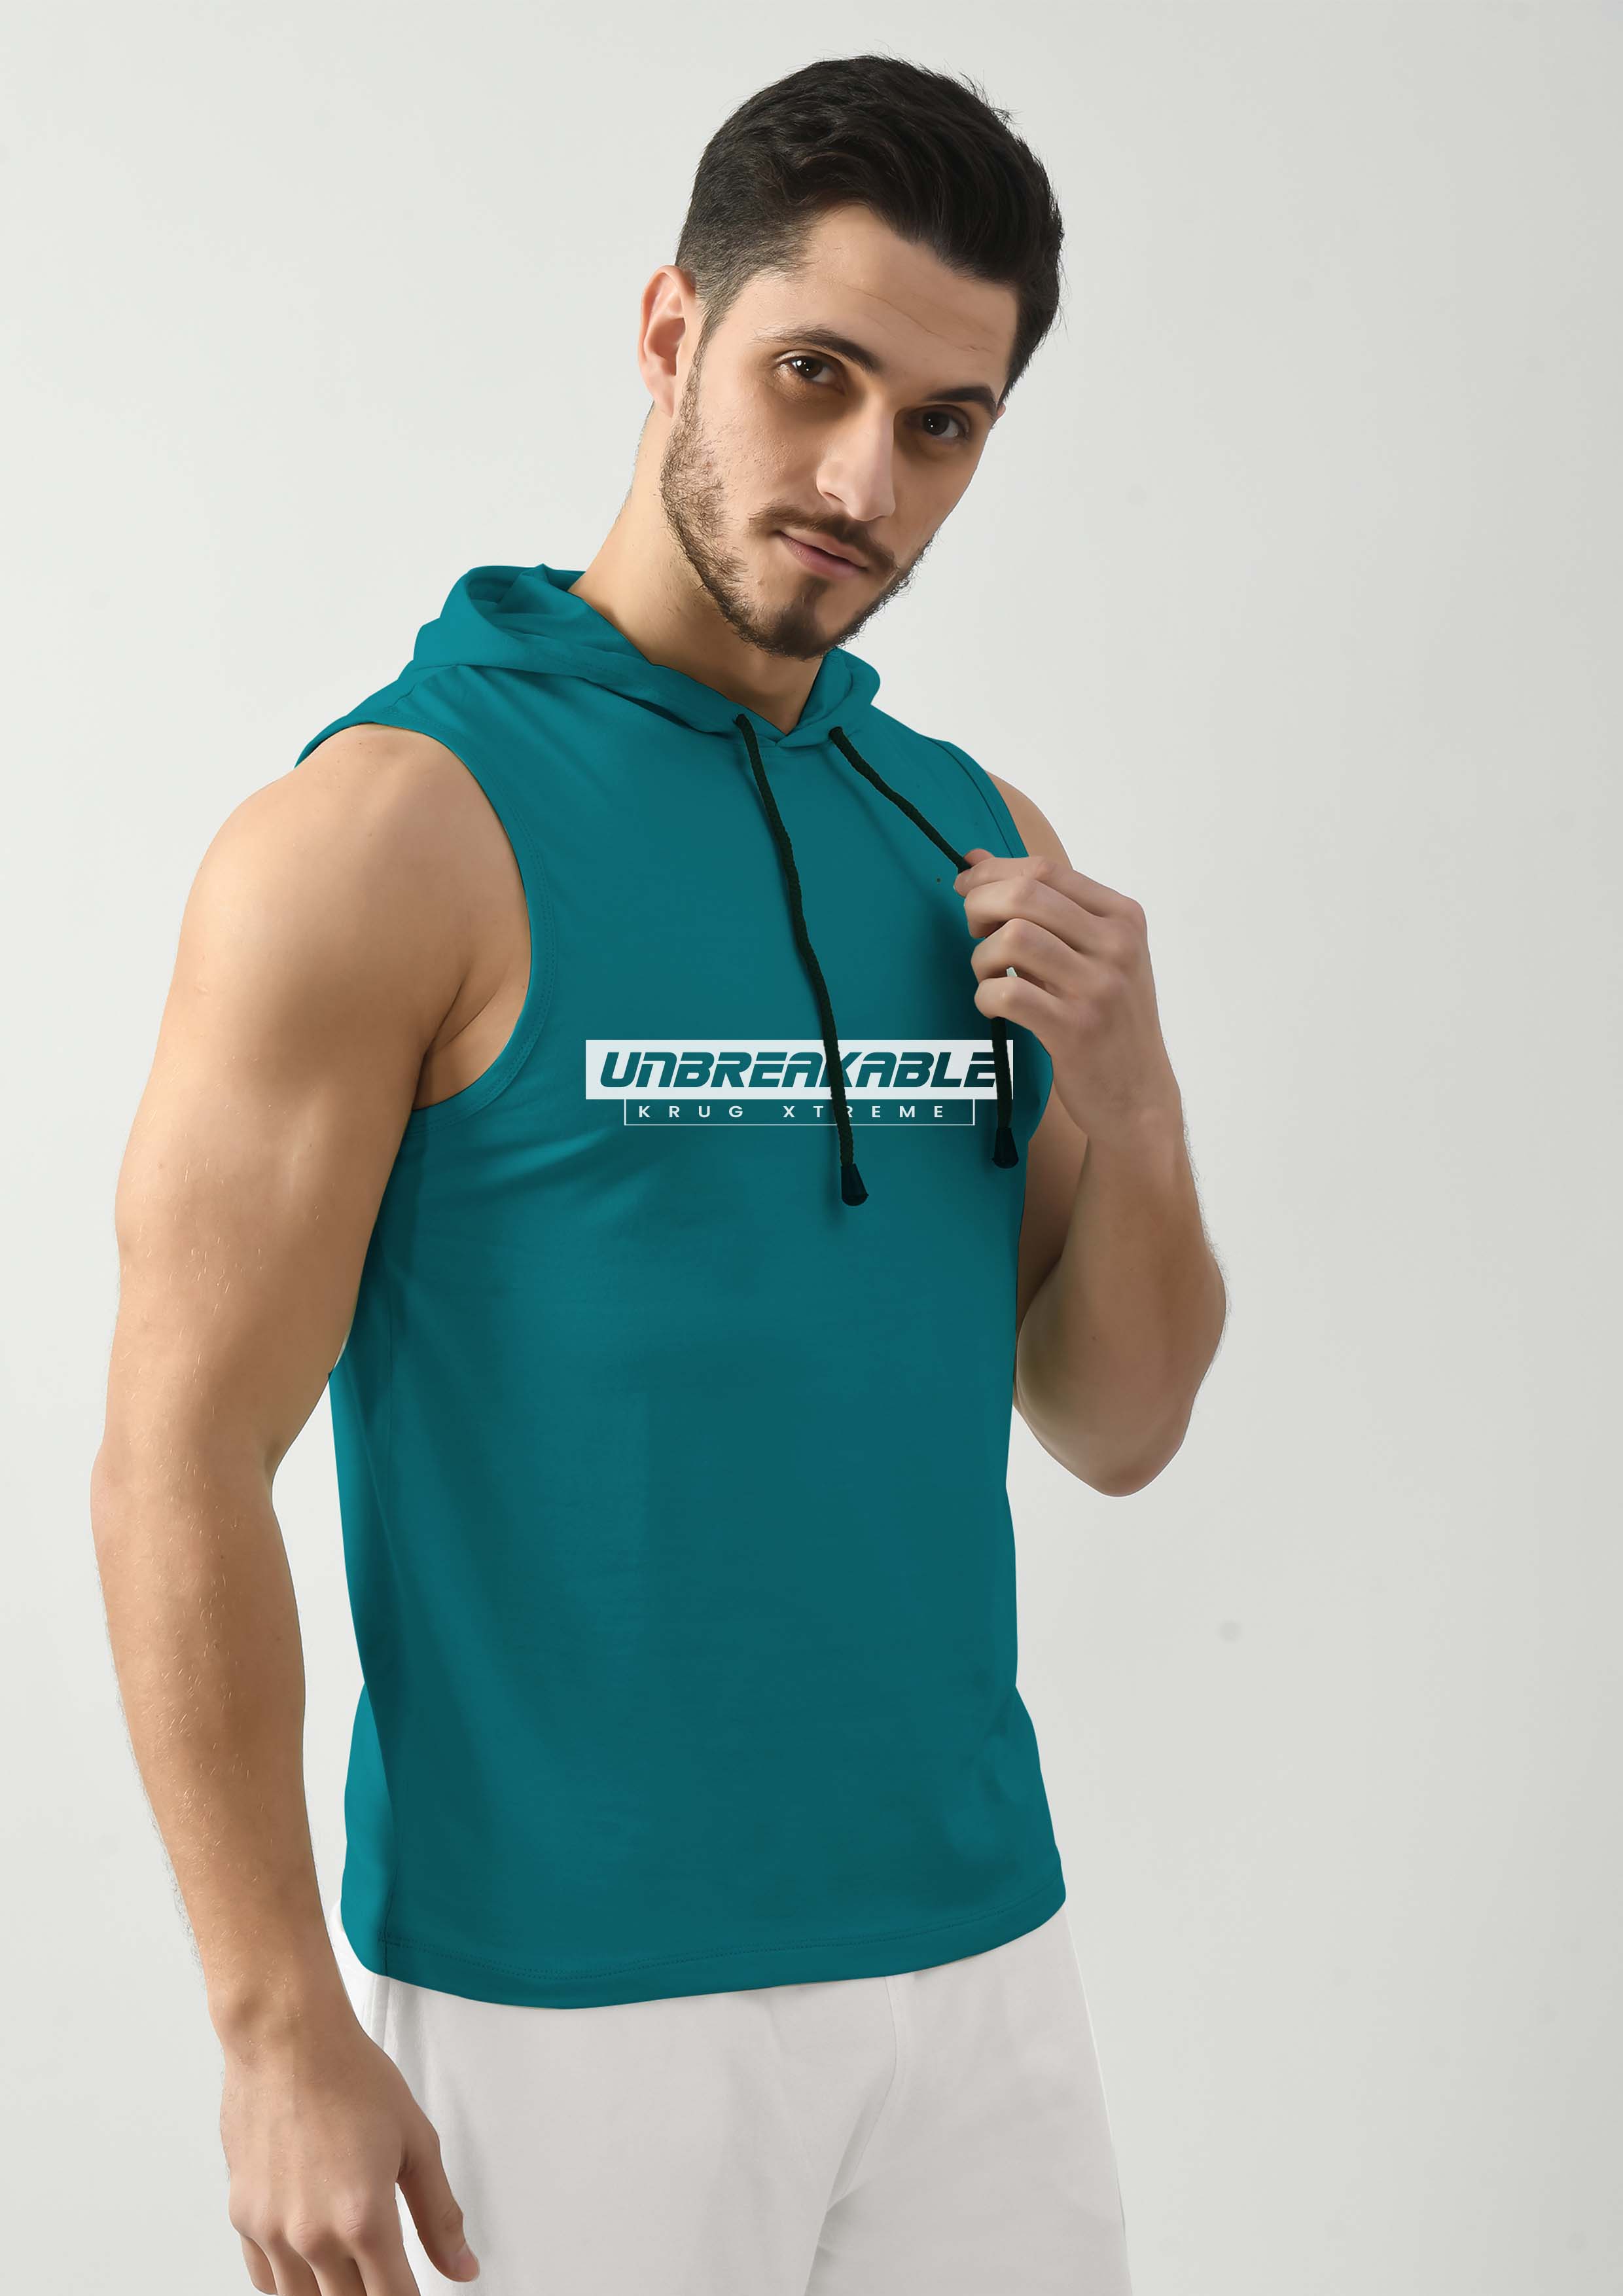 Breezy Green Gym Tank Top for Men with Hoodie